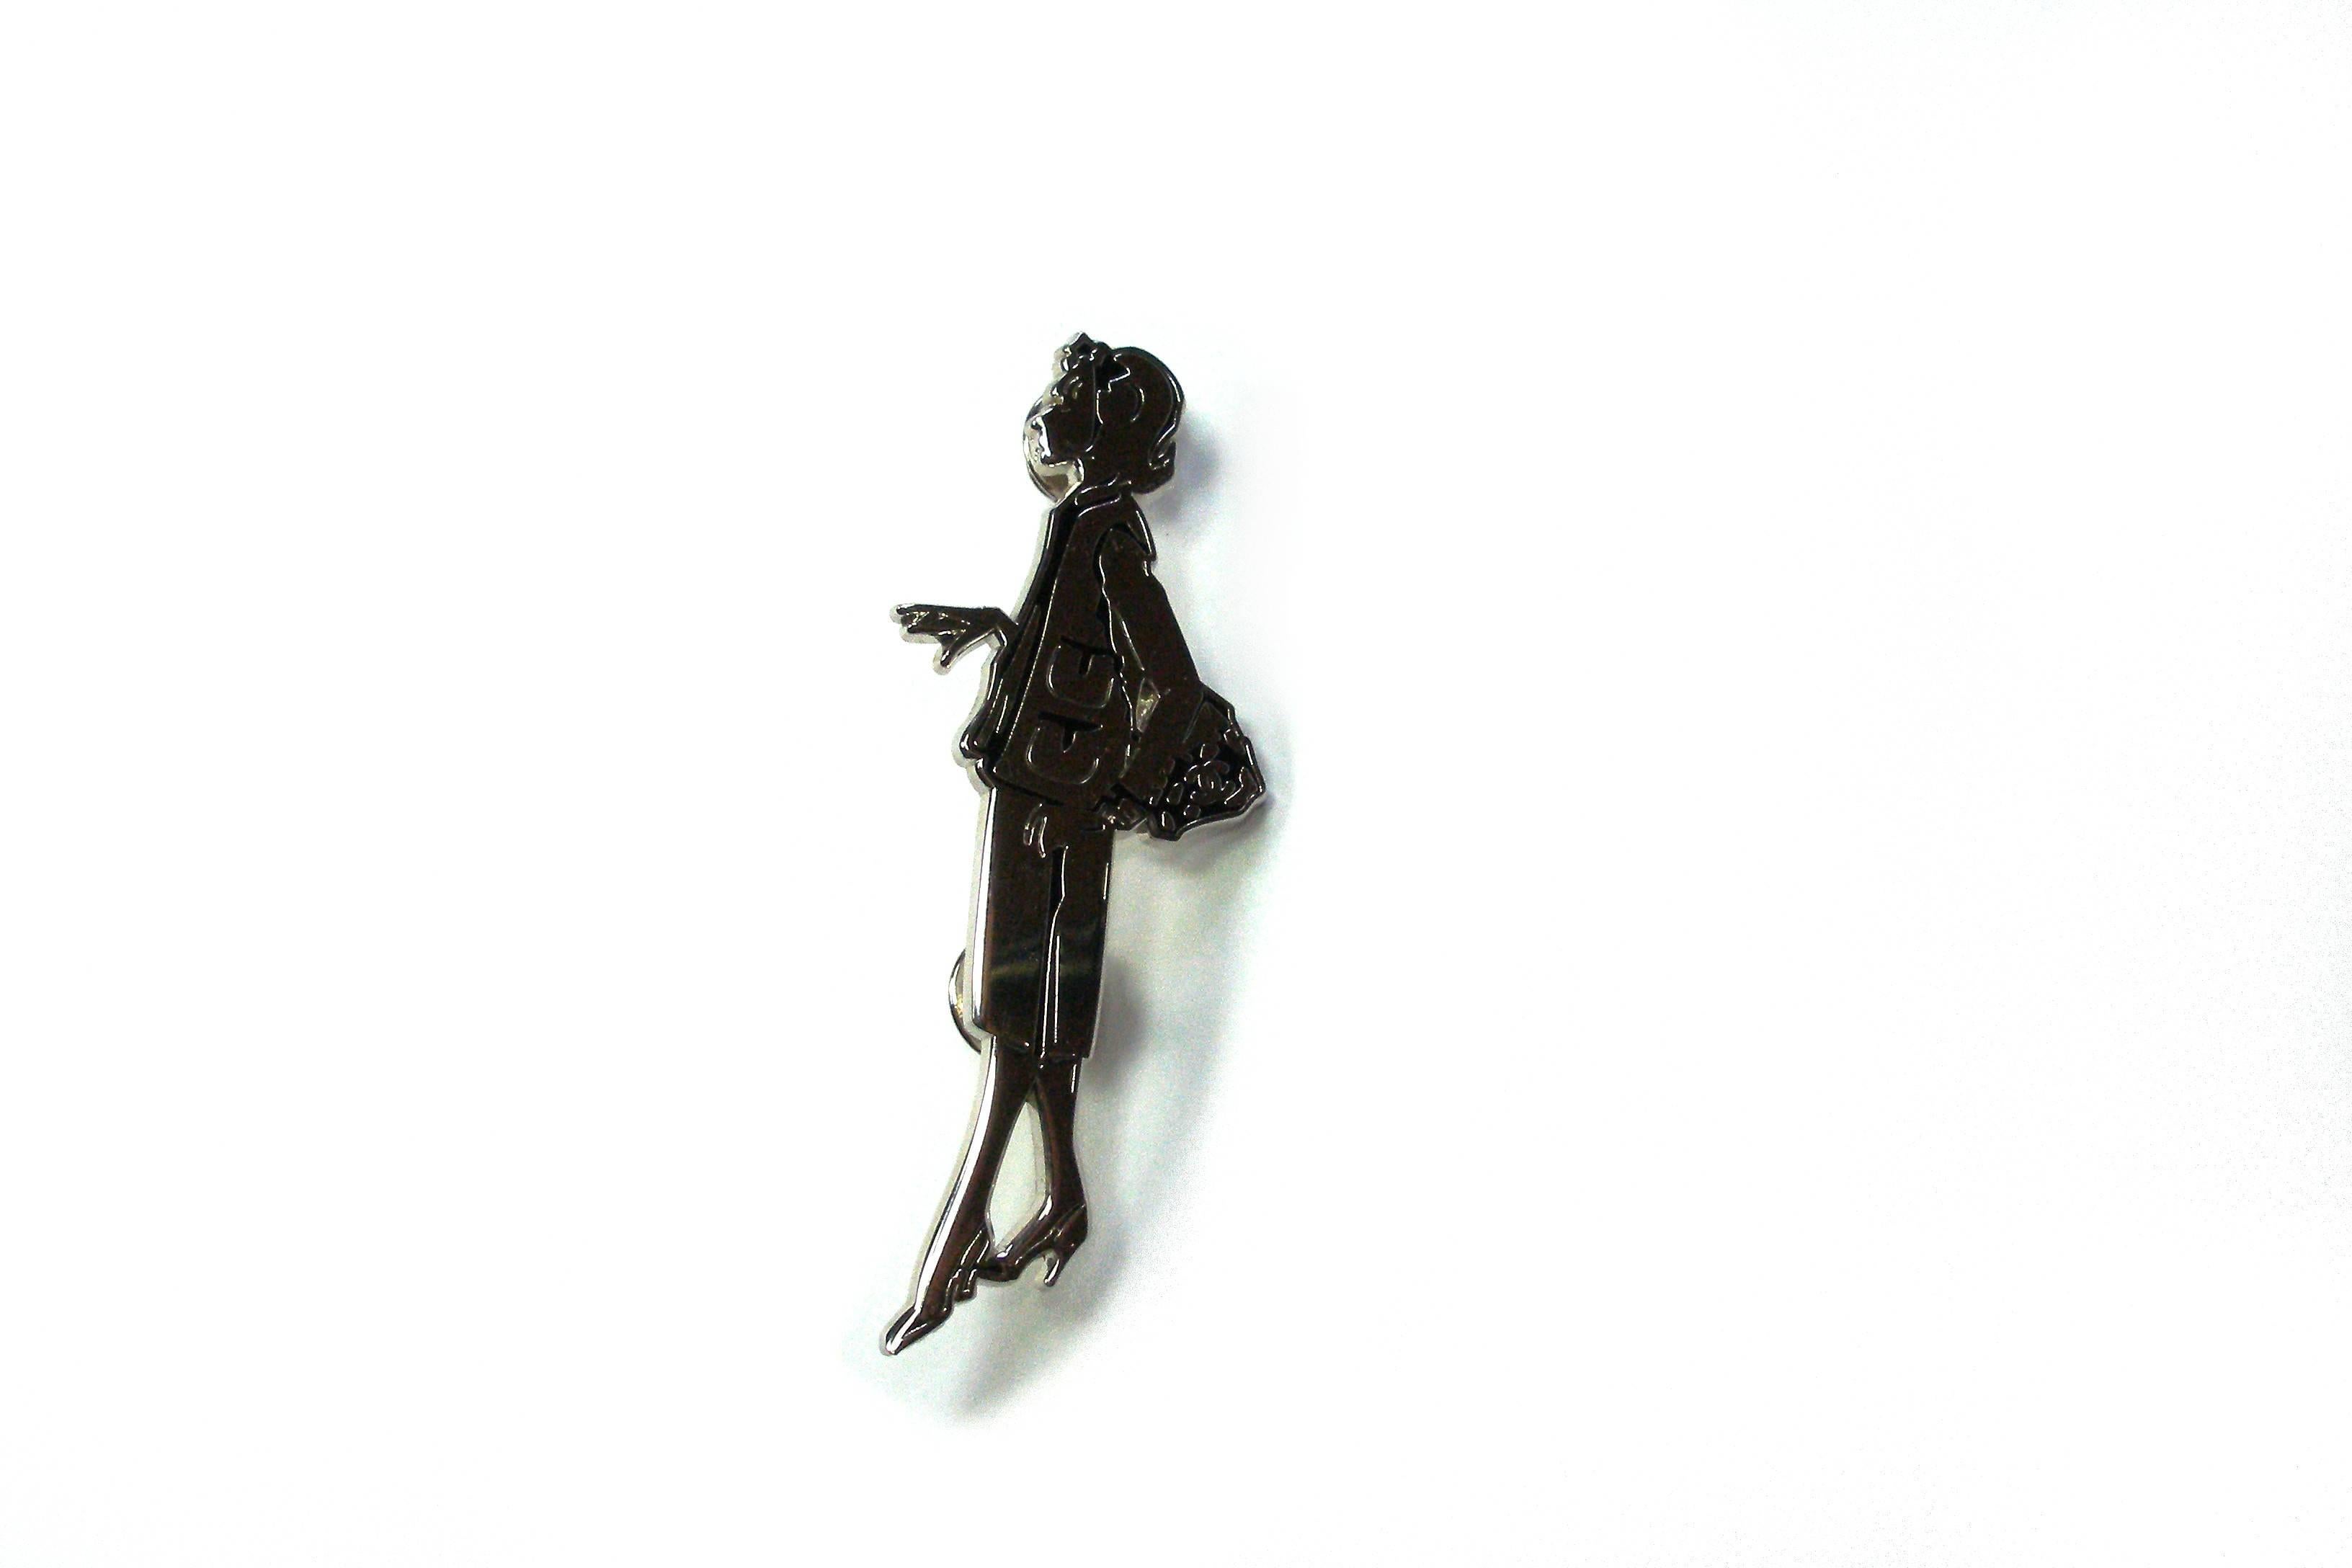 Mademoiselle Coco Pin's
Métal silver and enamel black
Size : 7.2 x 2.3 cm
Code date : 03CCP
Pins with micro scratches
Thank you to look at the pictures
Its come with Chanel box
INTERNATIONAL BUYERS TAXES ARE INCLUDED .
Thank you for visiting my shop